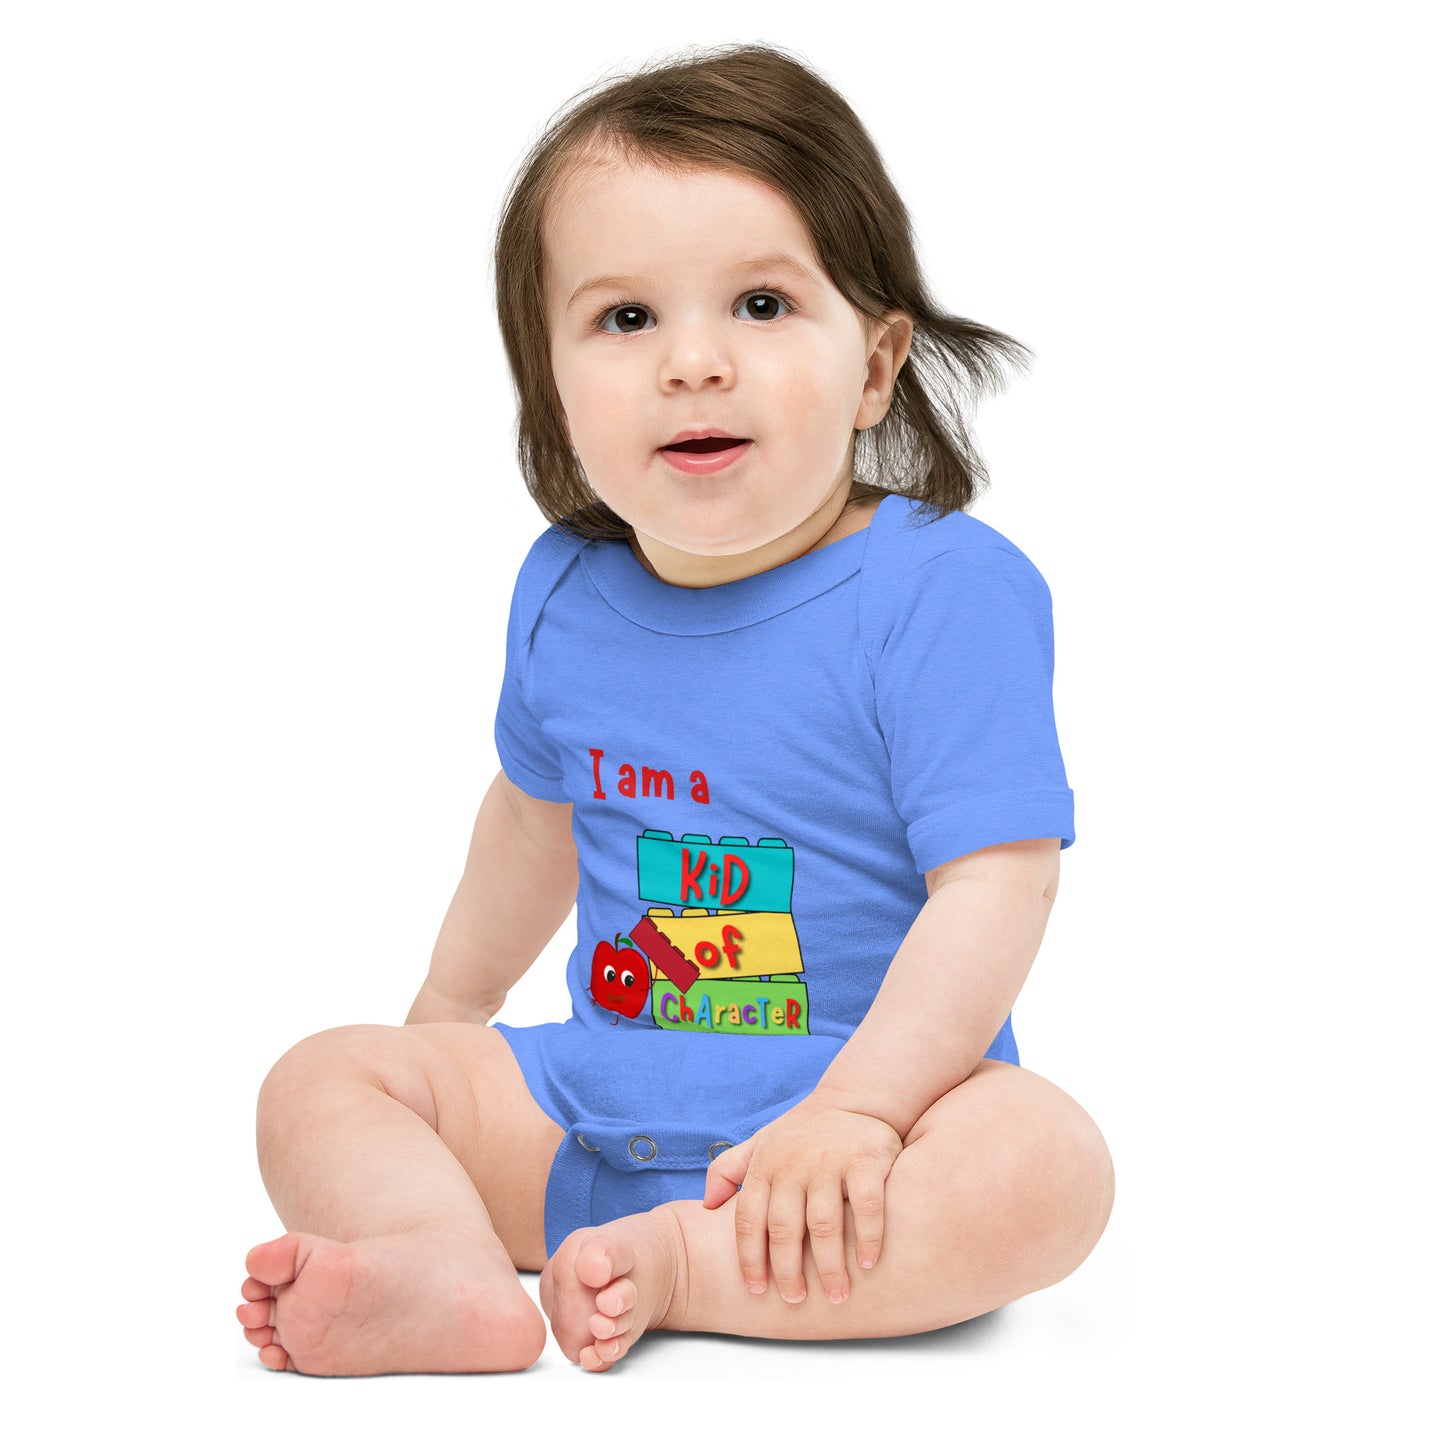 KOC Baby I Am A Kid of Character - Baby short sleeve one piece